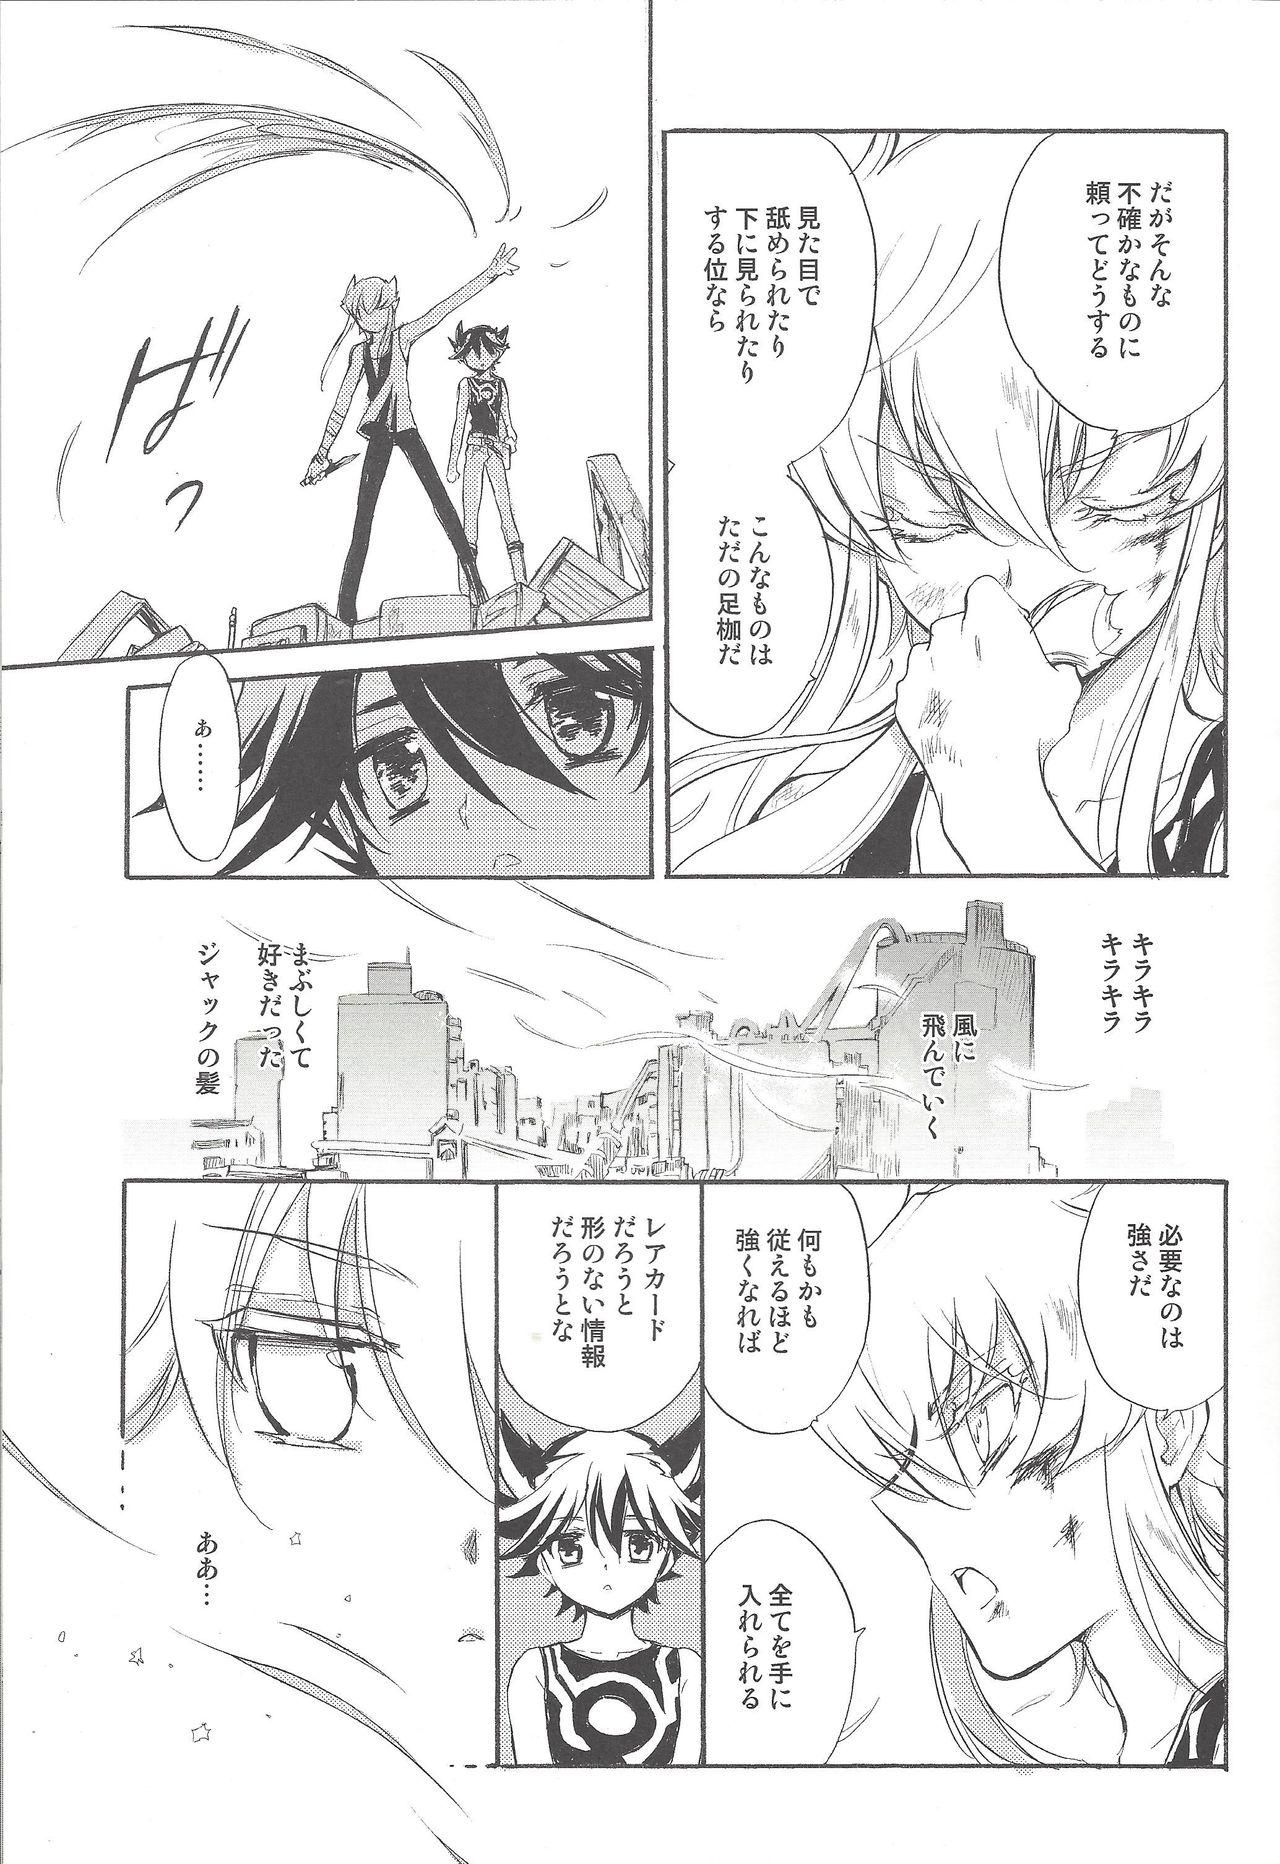 Ink Hoshi no Love Letter - Yu-gi-oh 5ds Gay Cut - Page 12